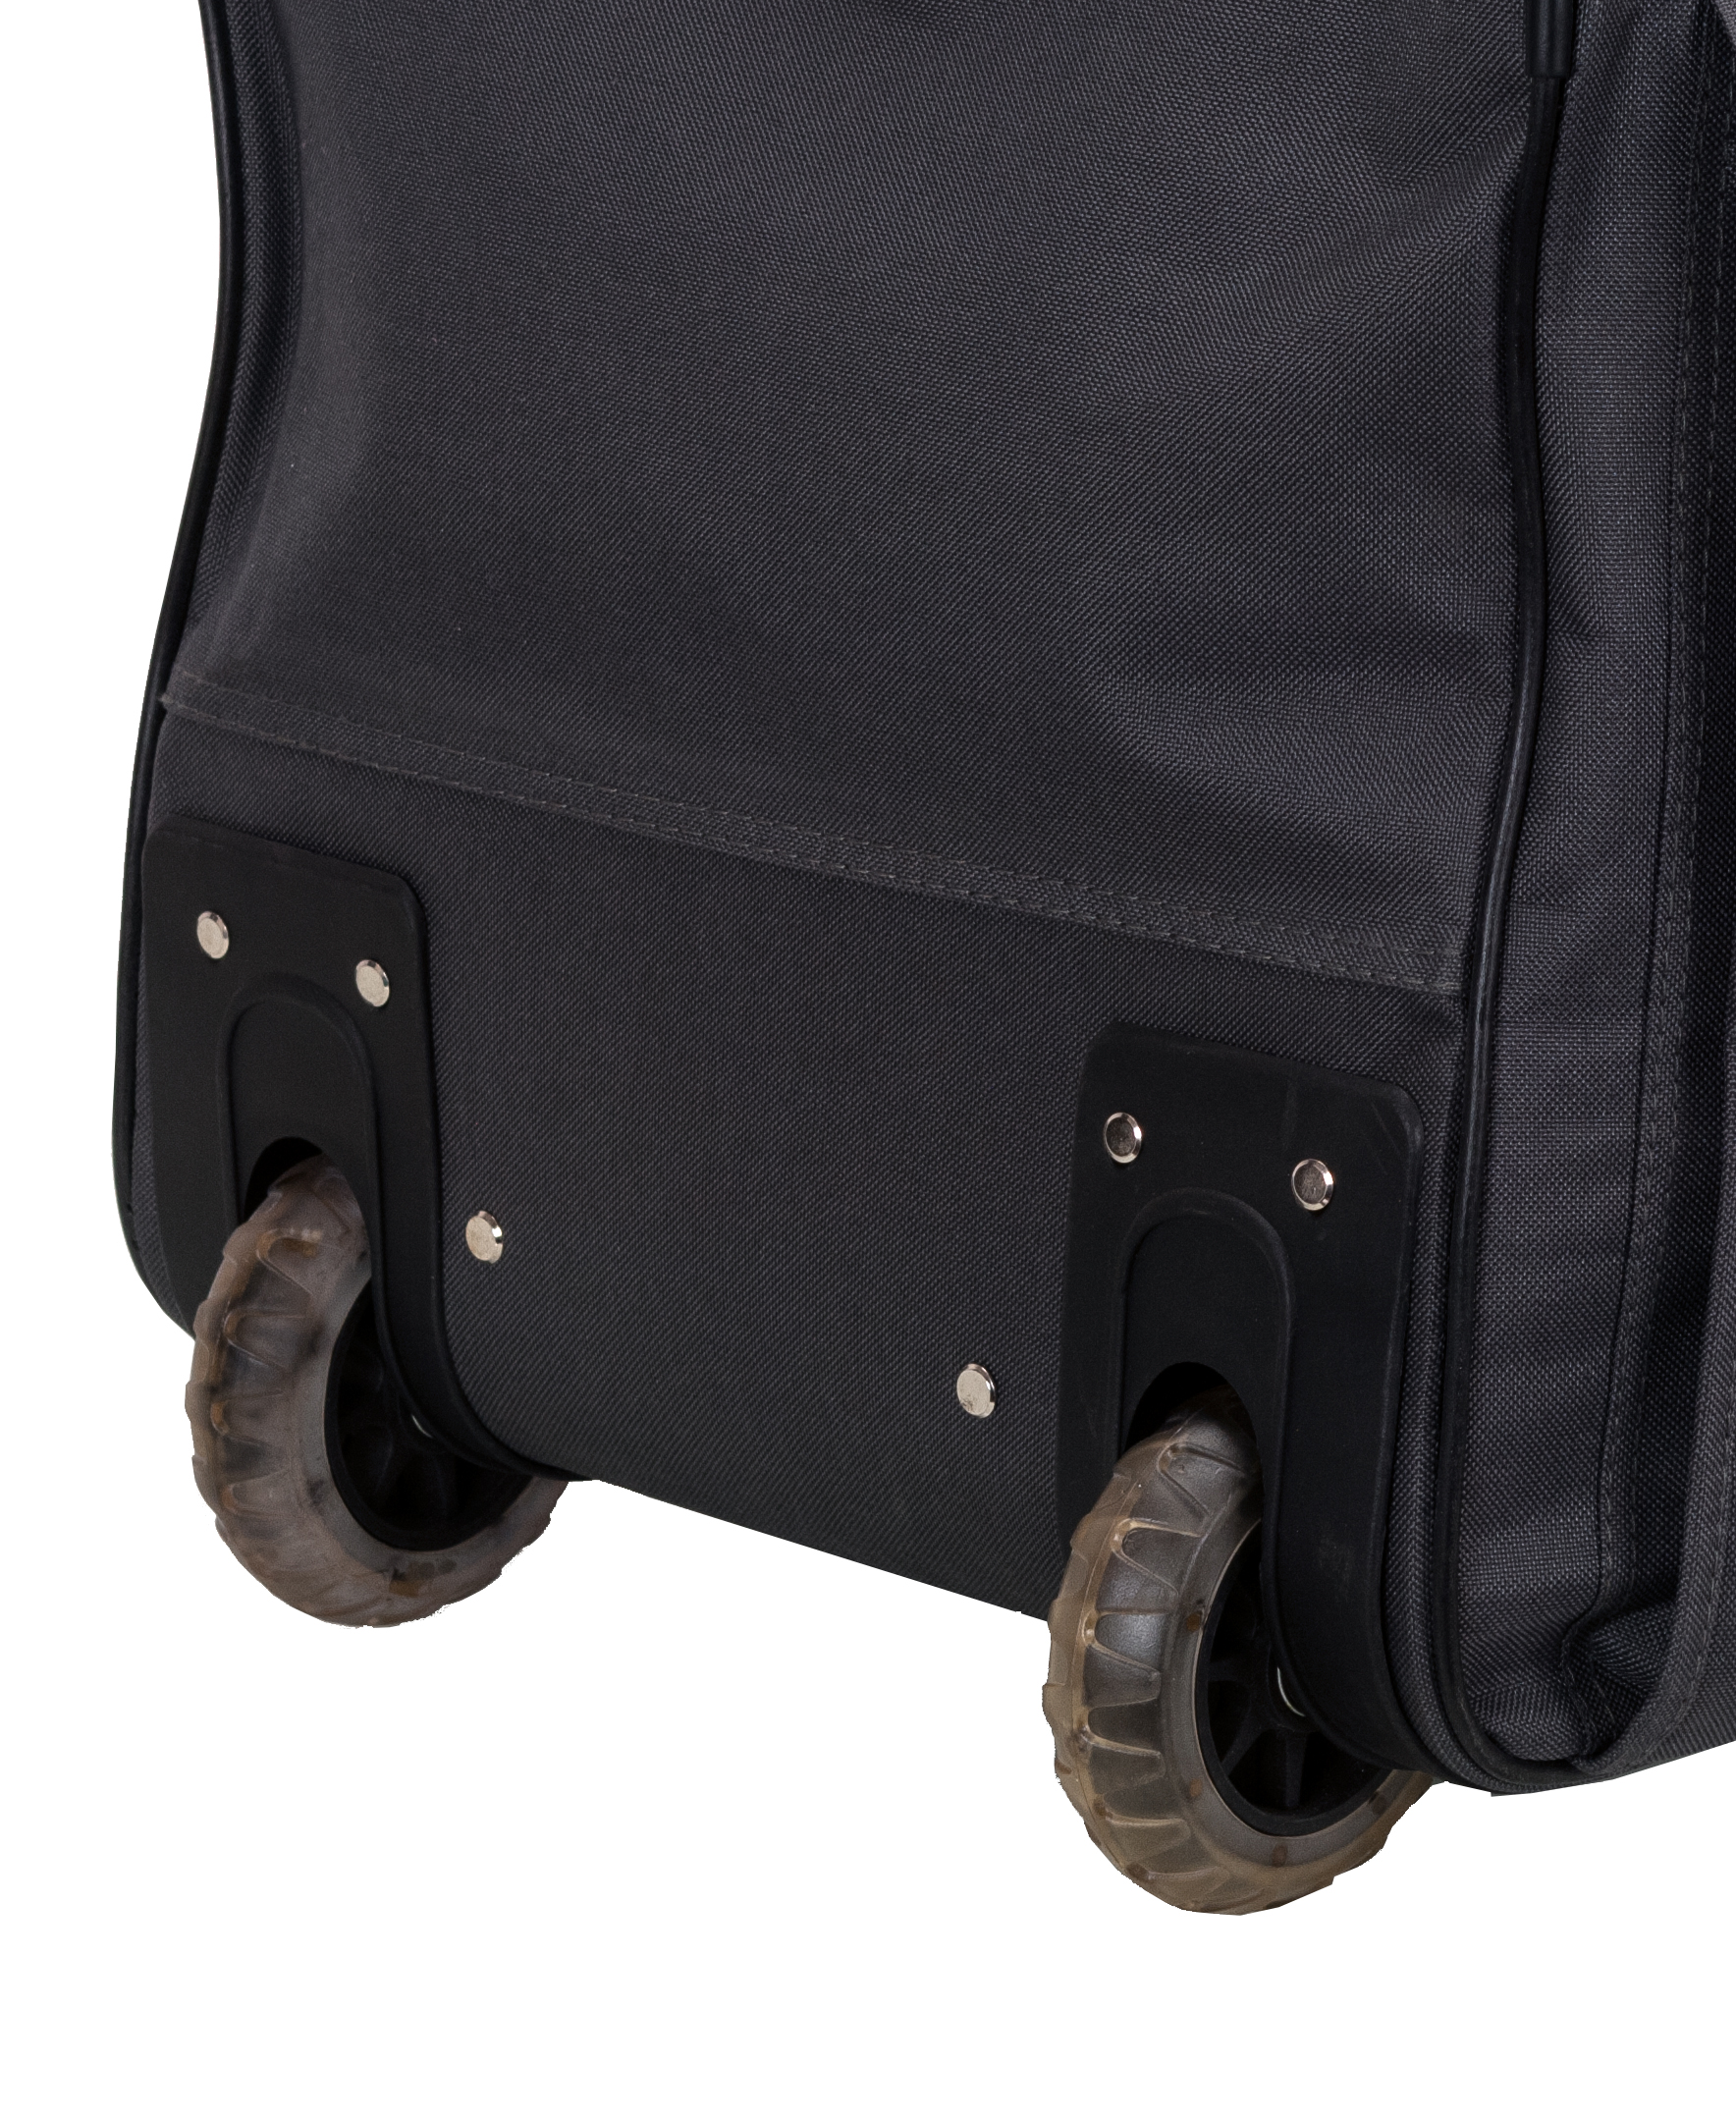 Rockland Luggage 30" Rolling Duffle Bag PRD330 - image 5 of 5